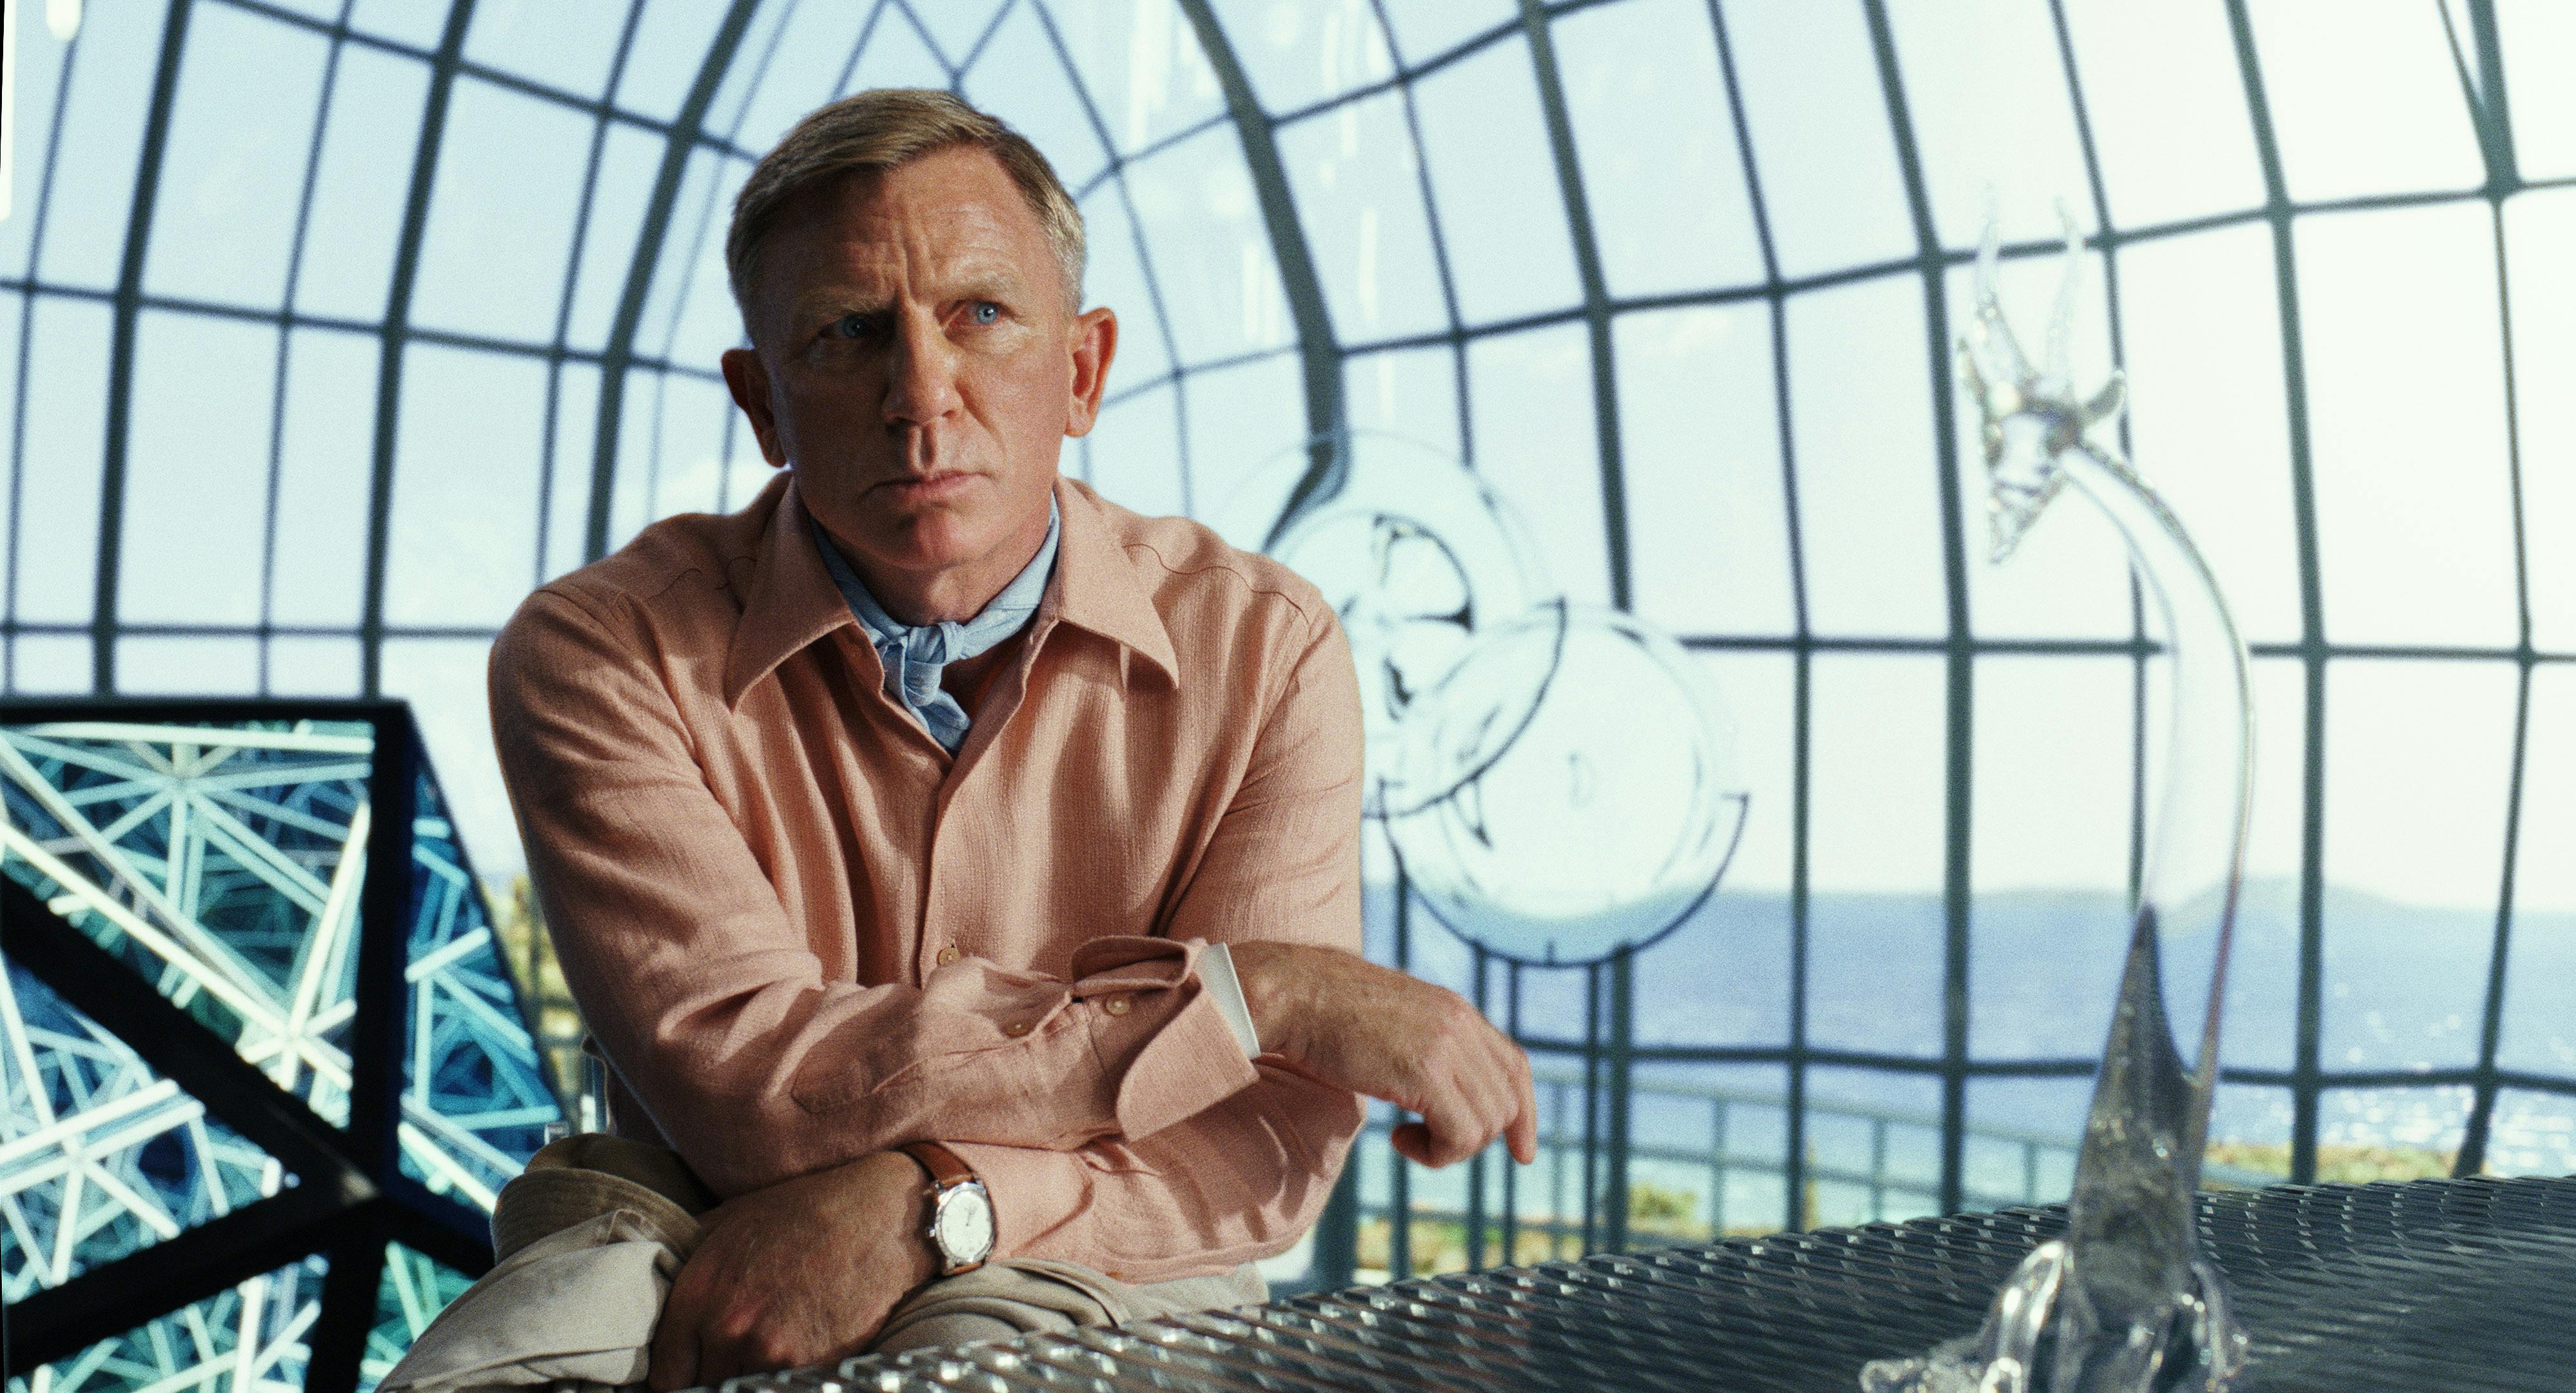 Benoit Blanc wears a light pink jacket and light blue ascot, and looks puzzled in the glass onion overlooking the sea.